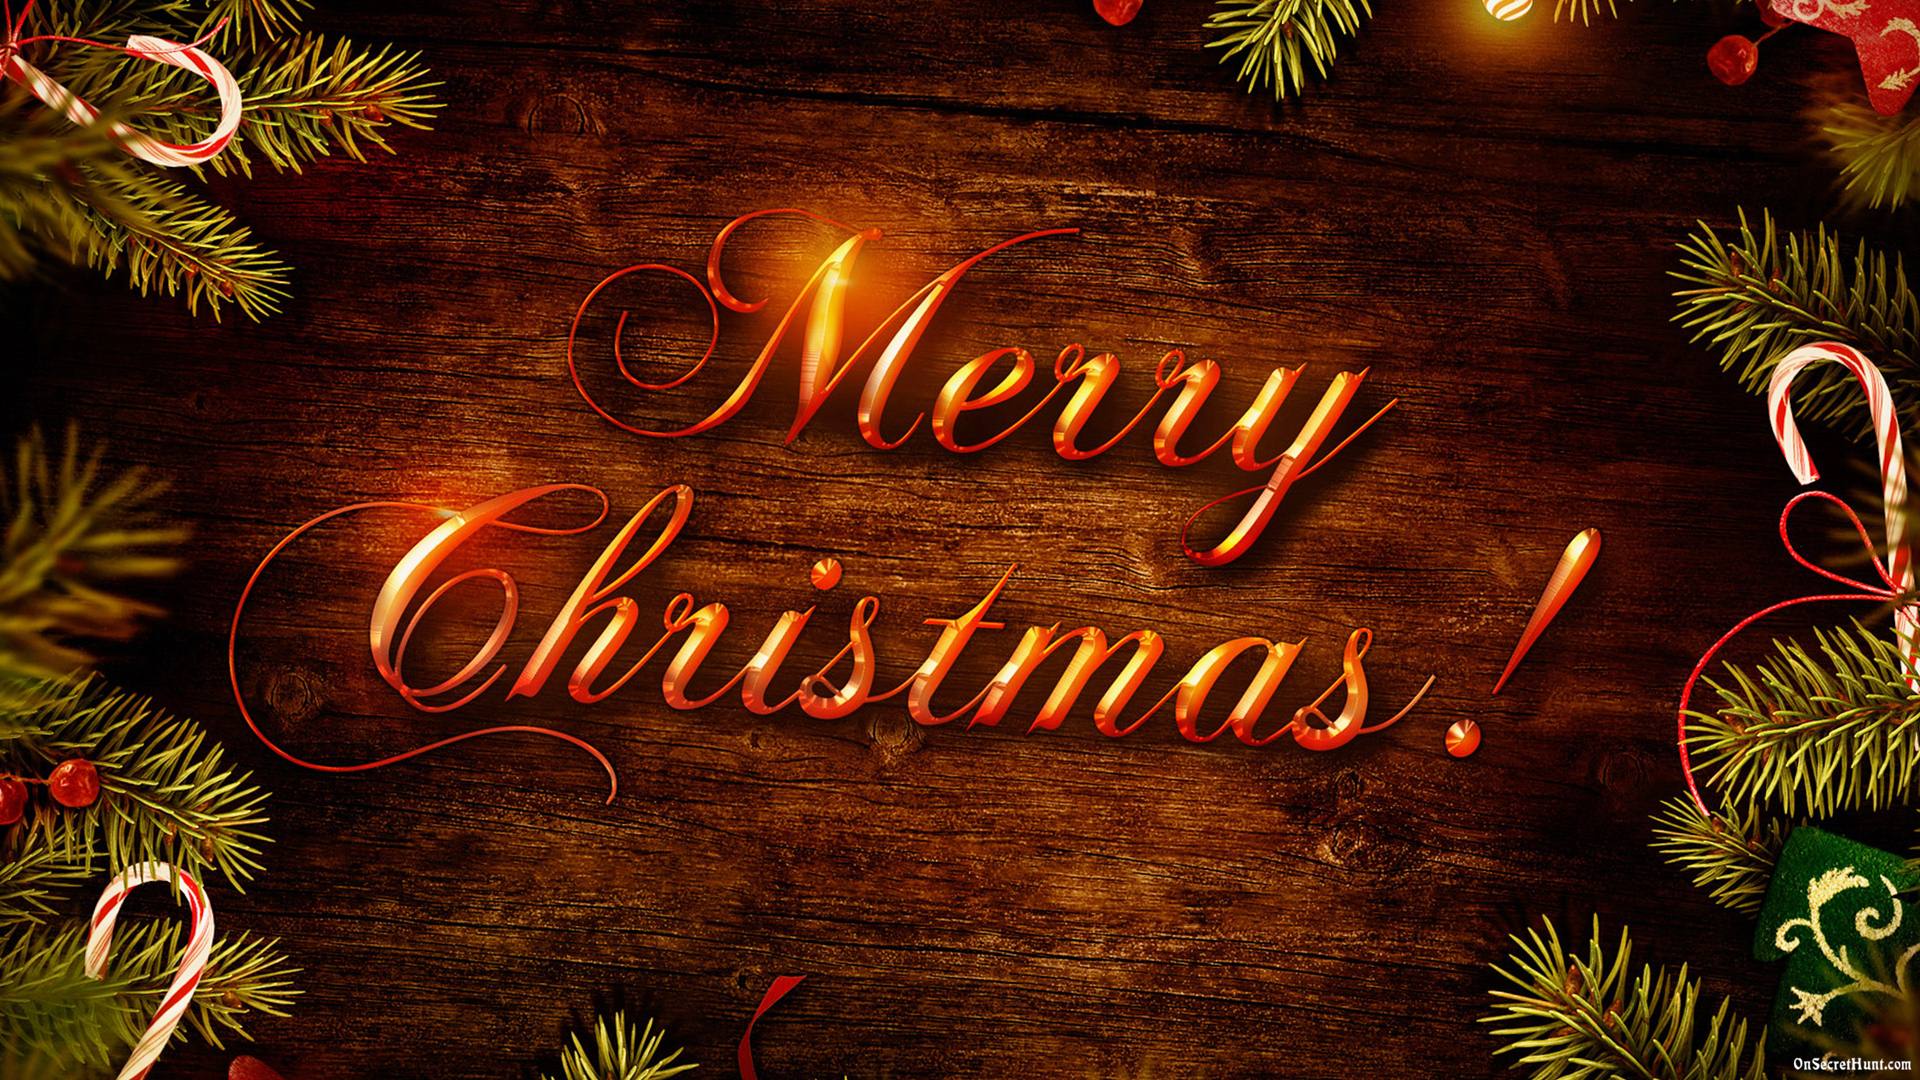 Happy Merry Christmas HD Wallpapers 2018 2019 | HD Walls